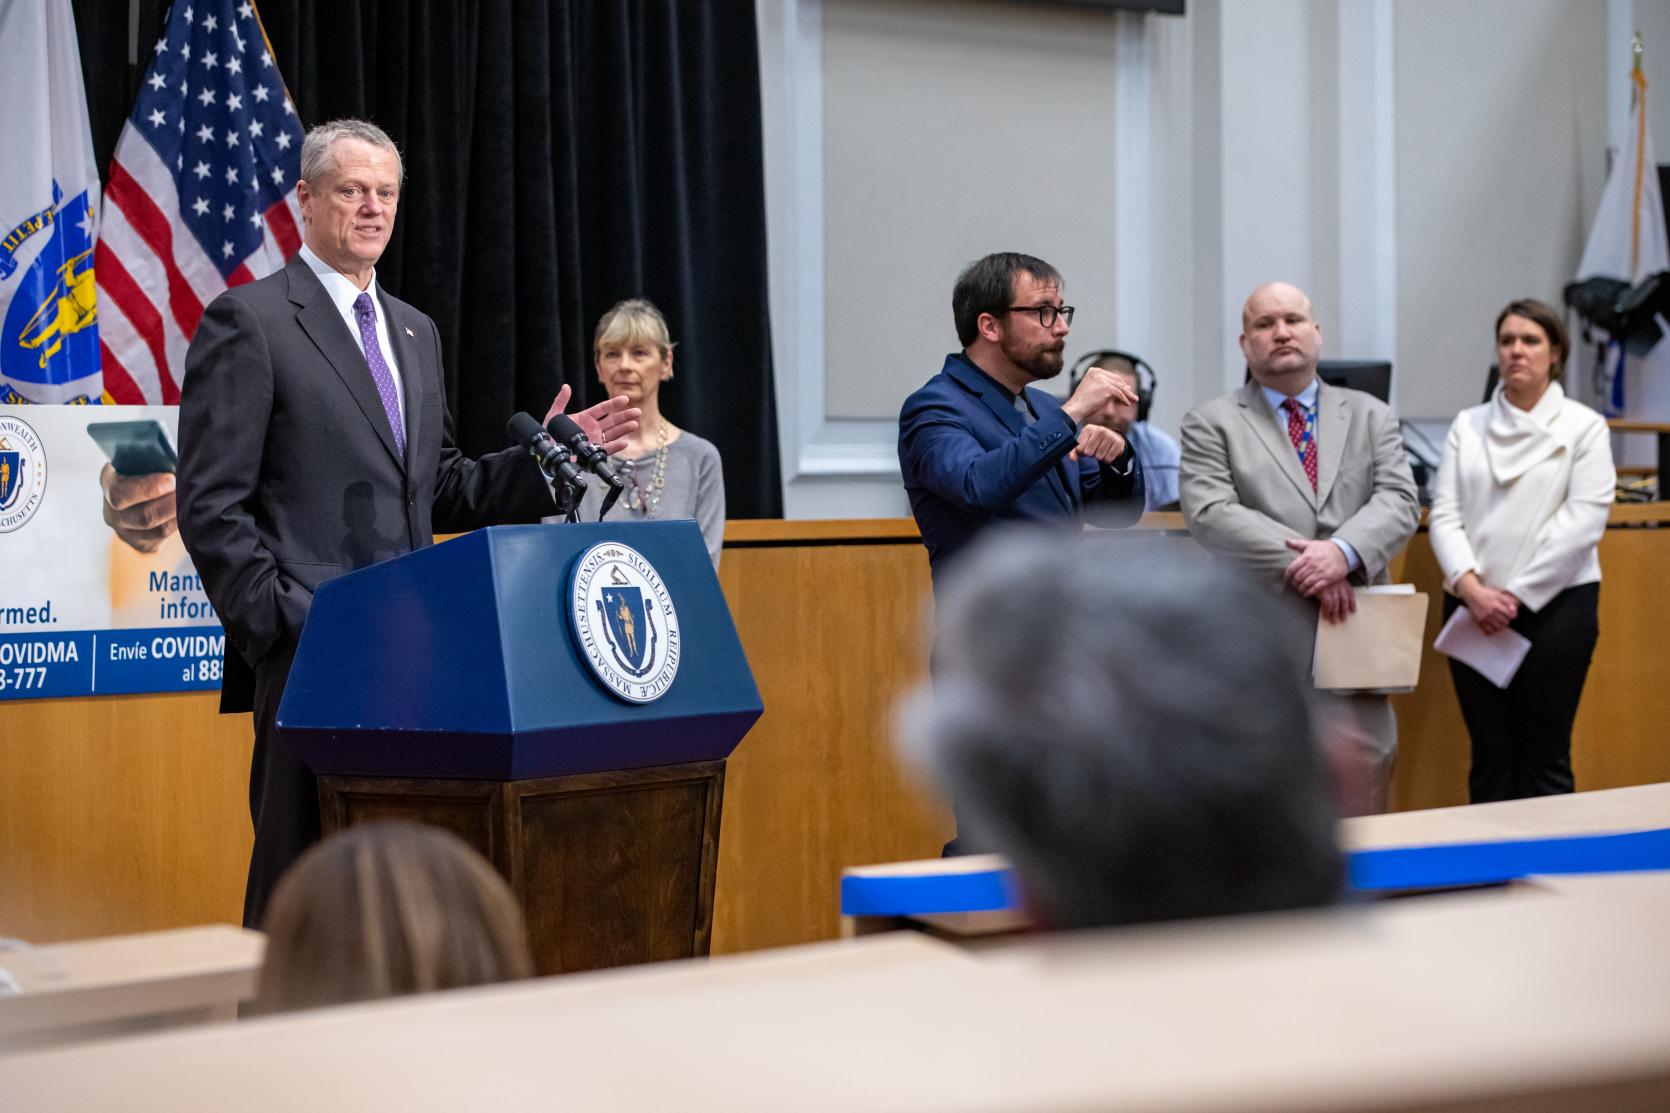 Baker-Polito Administration Announces Extension of School and Non-Emergency Child Care Program Closures, Continued Steps to Support COVID-19 Response